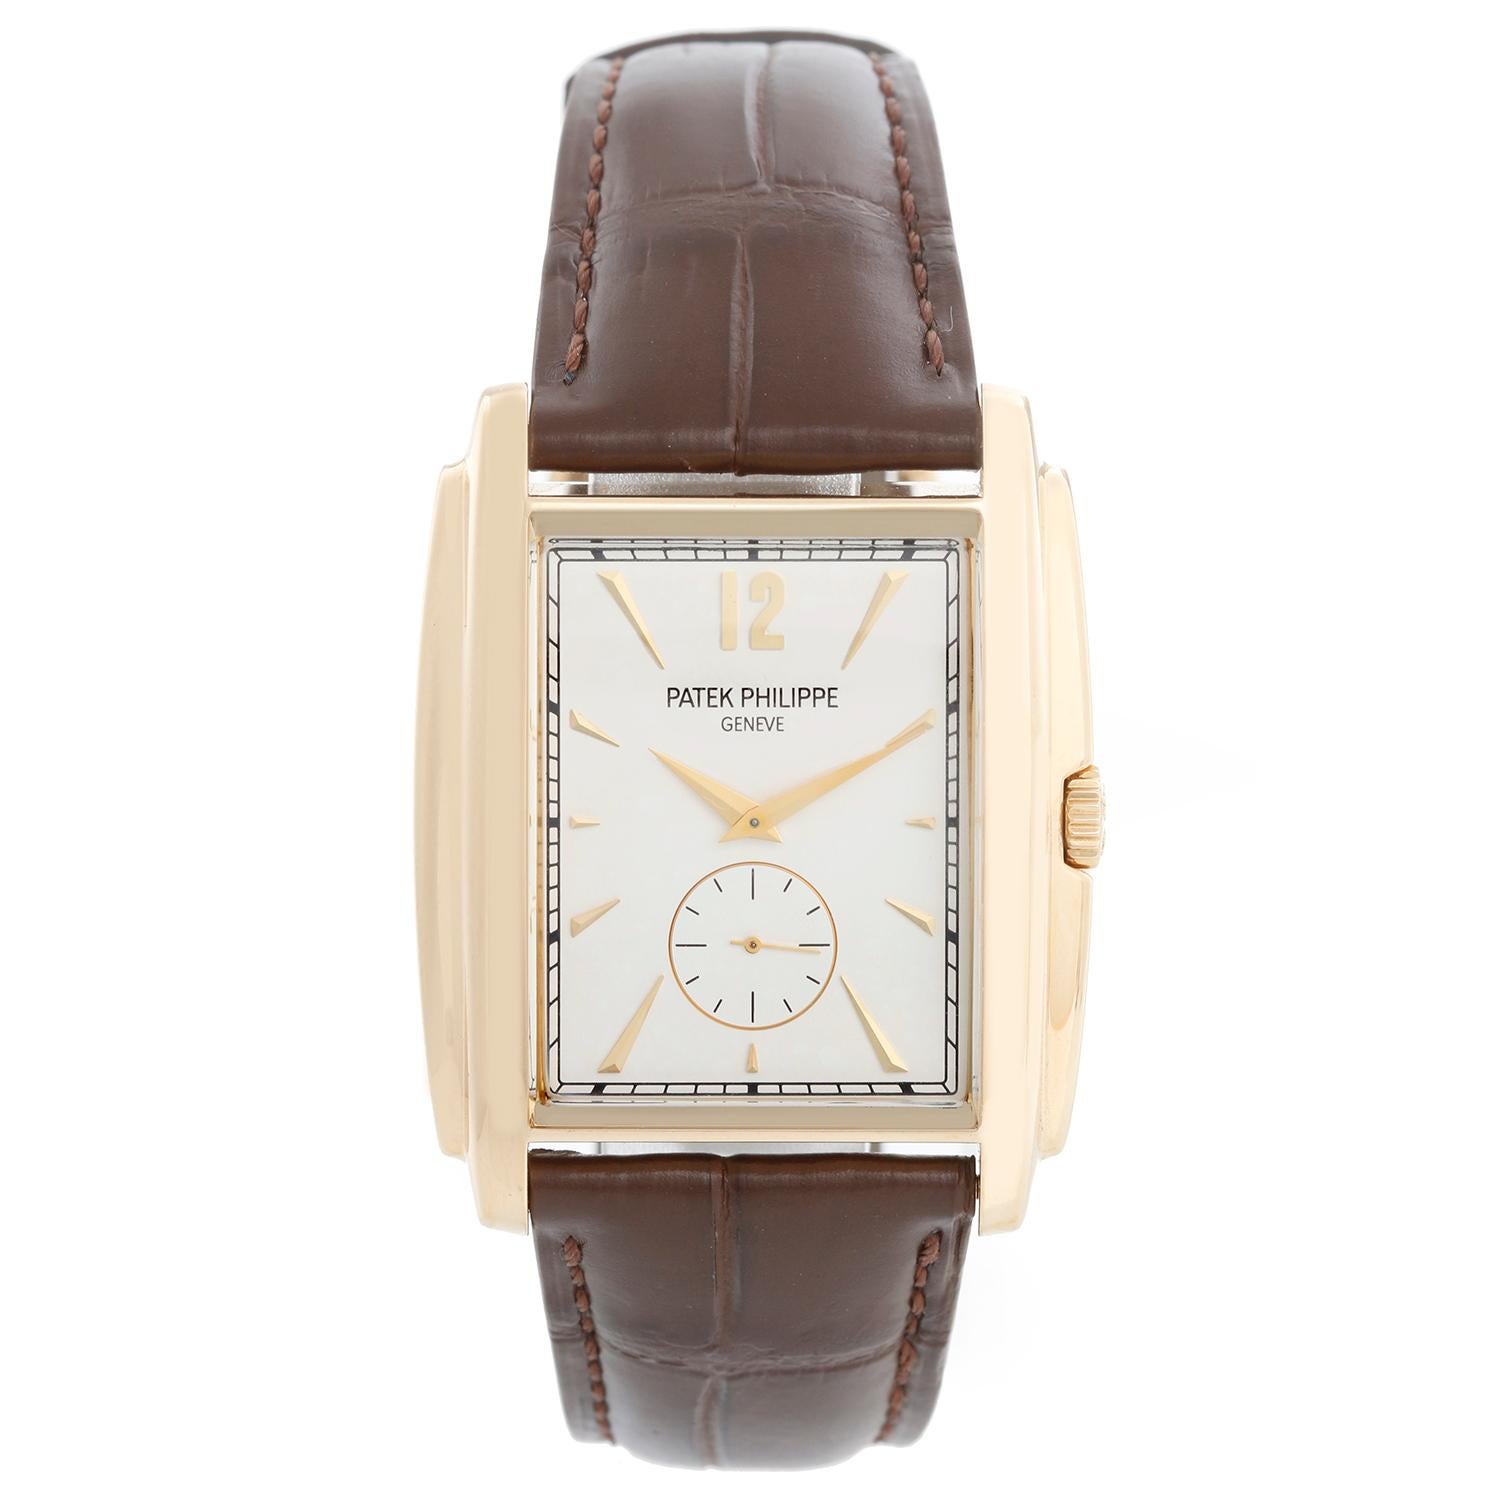 Patek Philippe & Co. Gondolo 18k Yellow  Gold Mens Watch 5124J - Manual winding. 18k yellow gold case (33mm x 43mm). Silver dial with stick hour markers. New brown Patek Philippe strap band with 18k yellow gold buckle. Pre-owned  with Patek travel